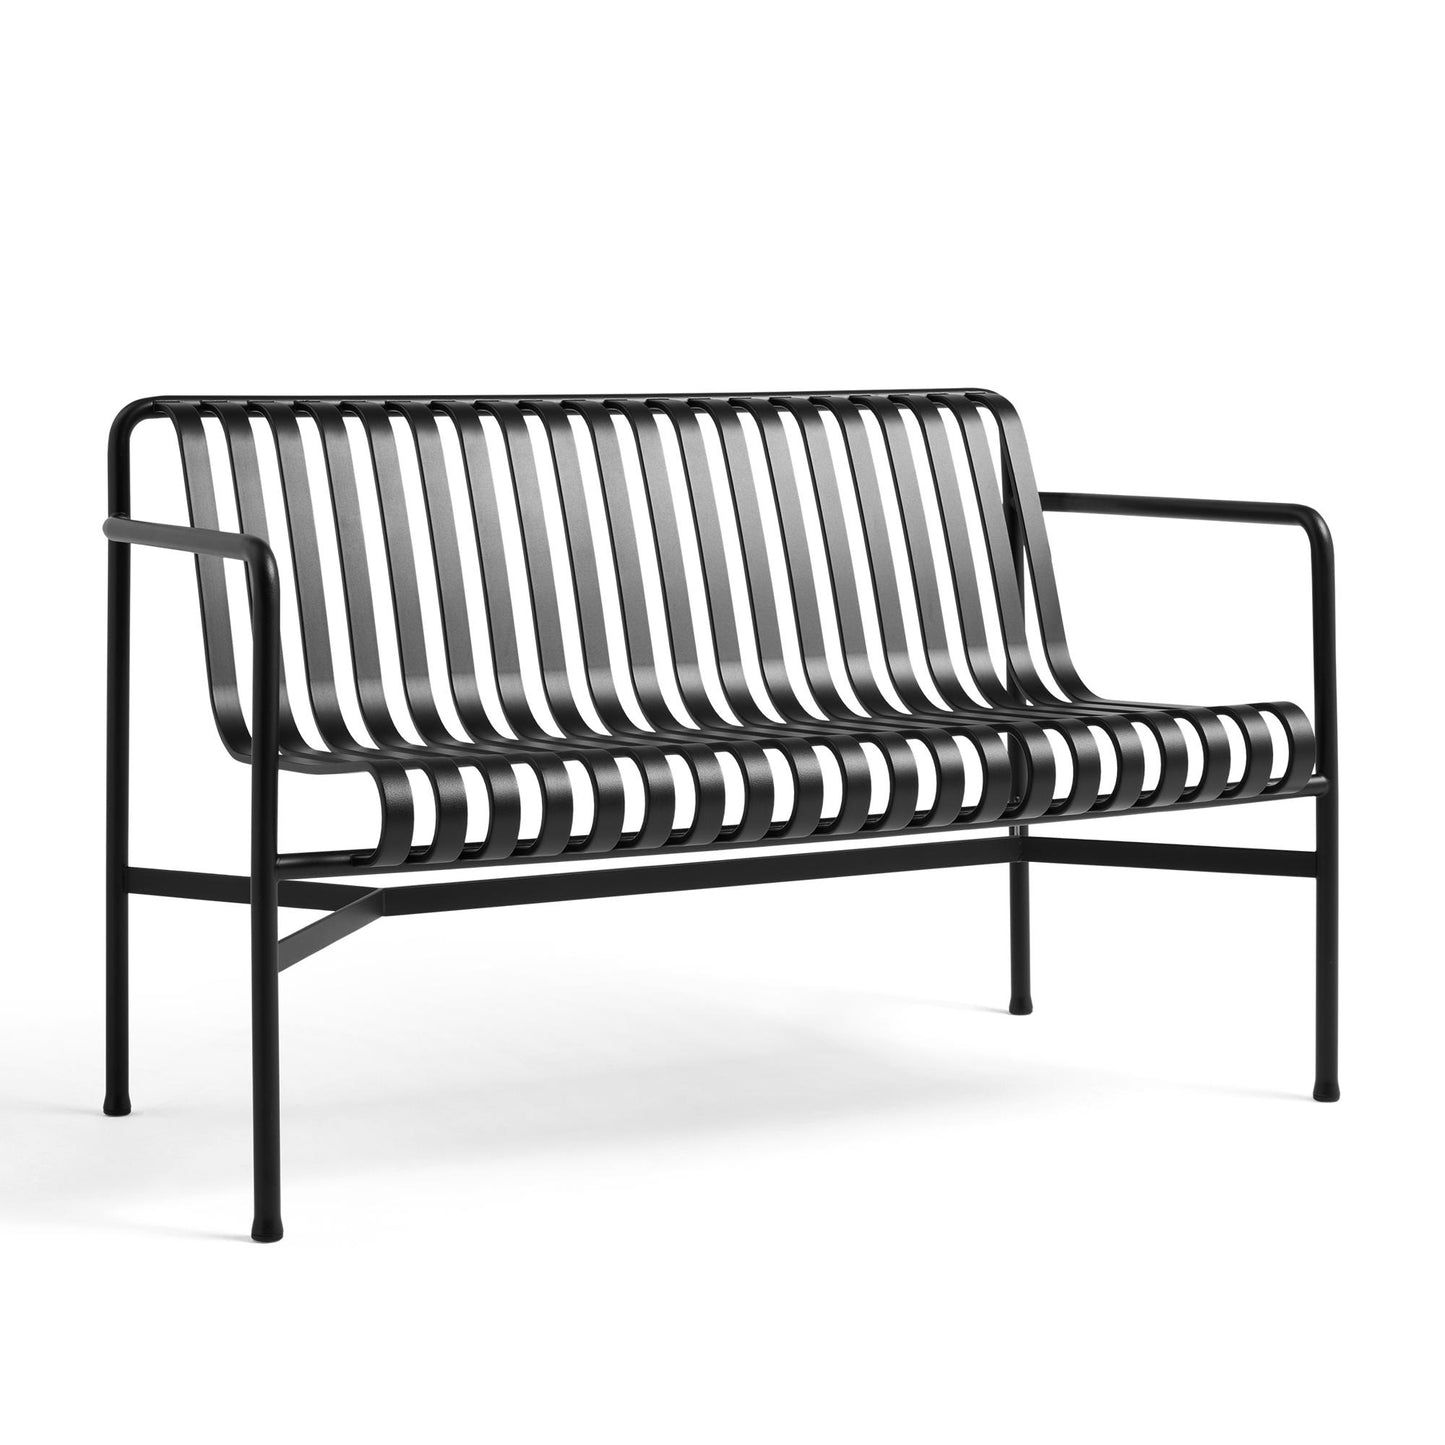 Palisade Dining Bench with Armrests by HAY #Anthracite